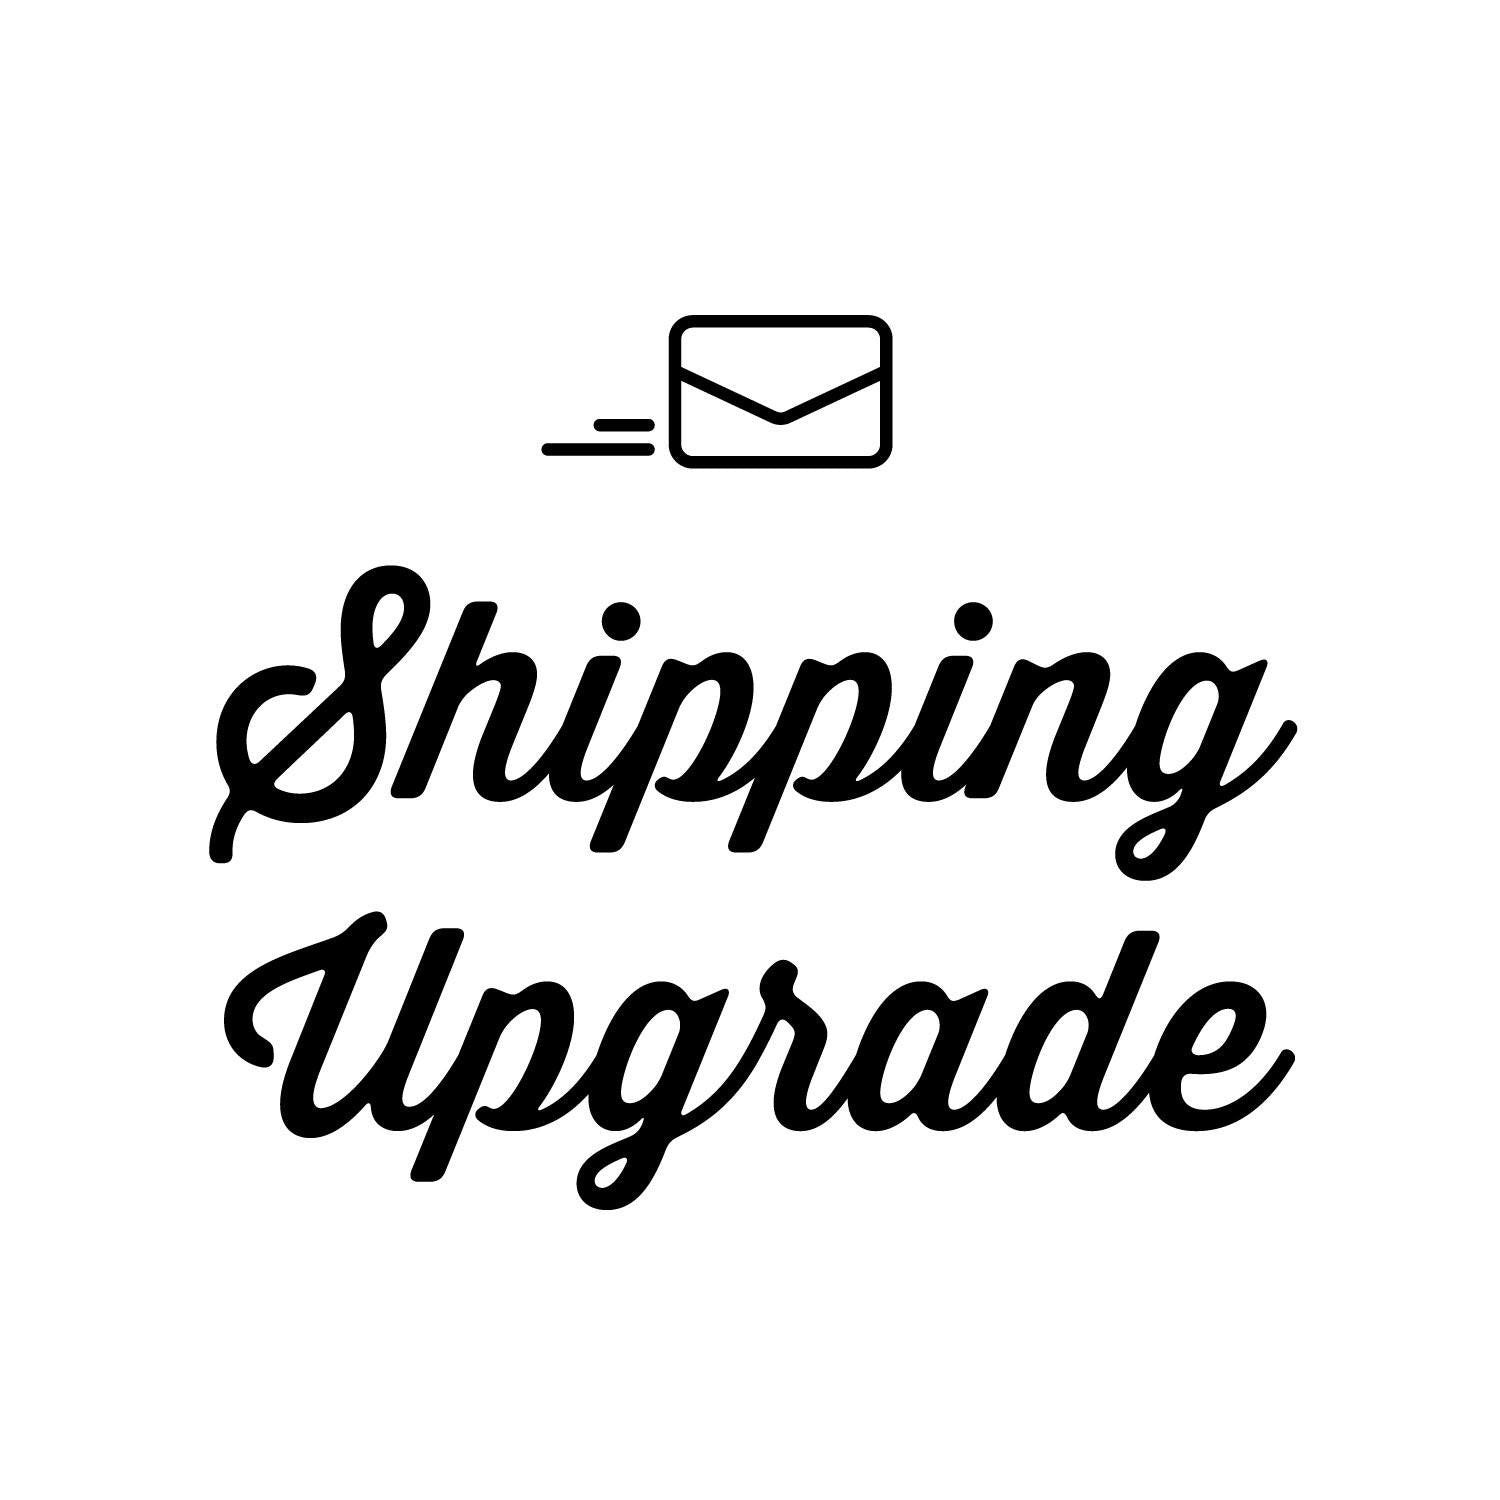 Shipping upgrade - Radical Buttons